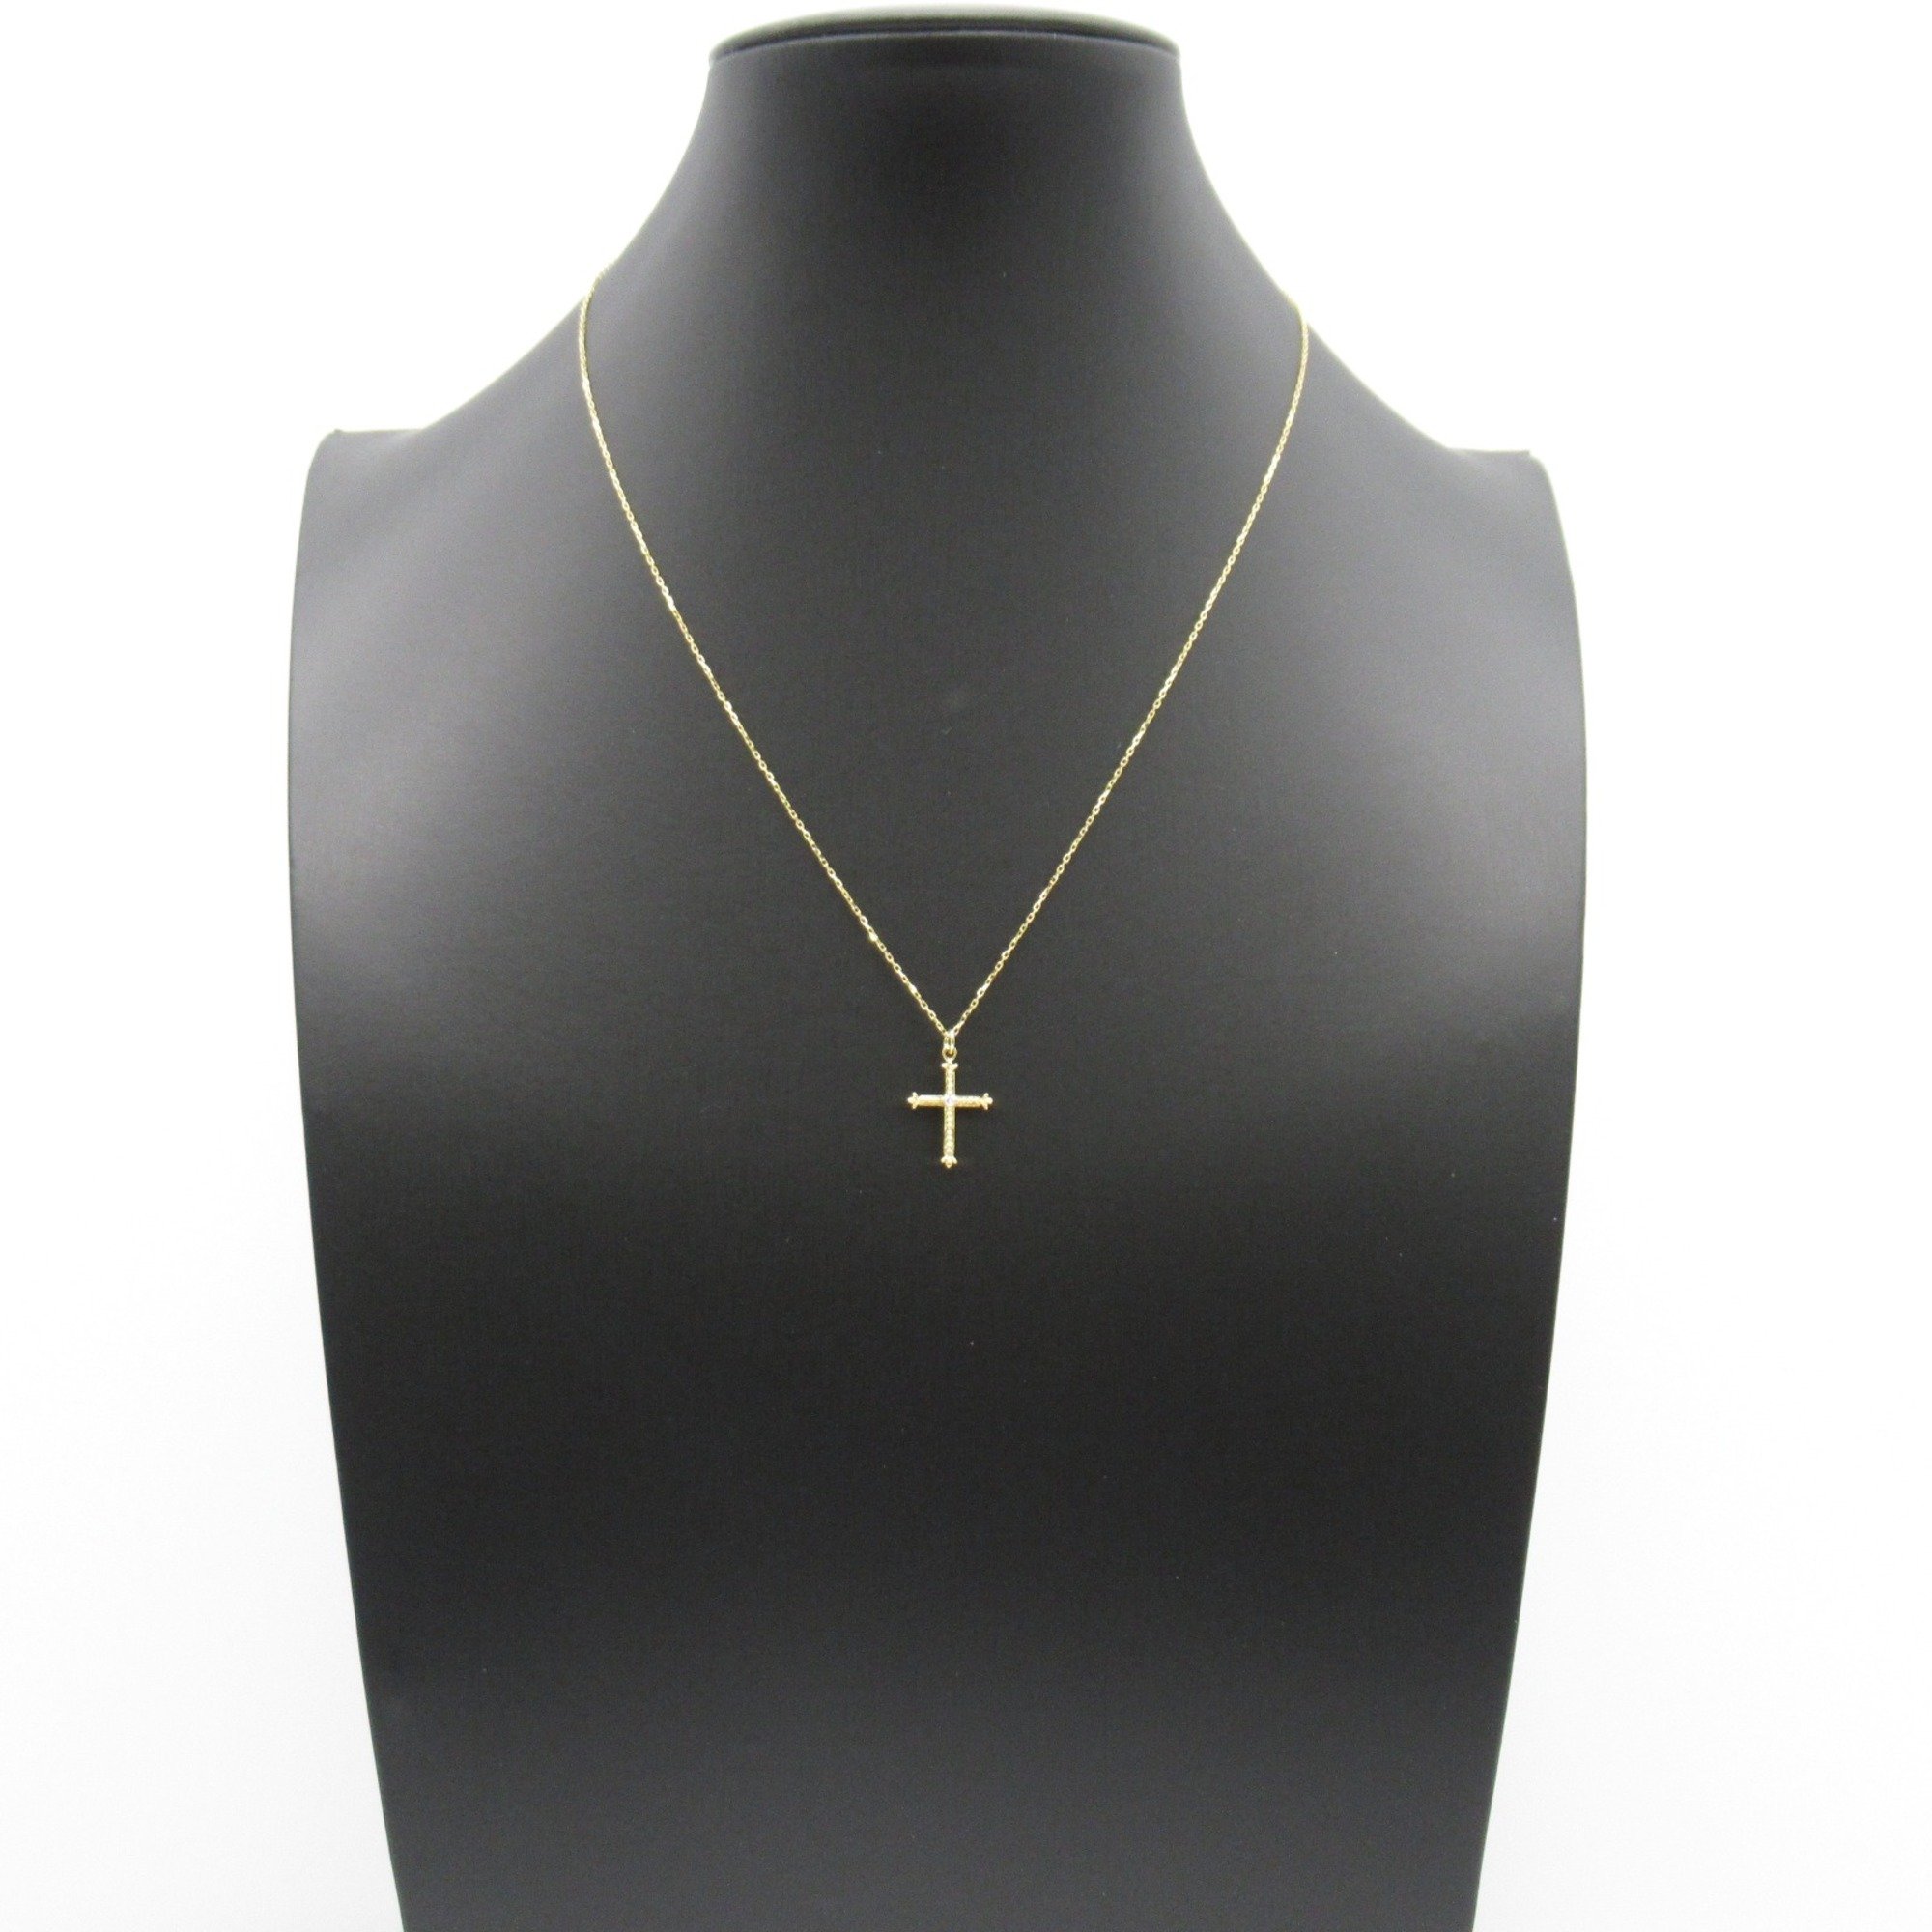 AHKAH Cleo Cross Diamond Necklace Necklace Clear  K18 (Yellow Gold) Clear